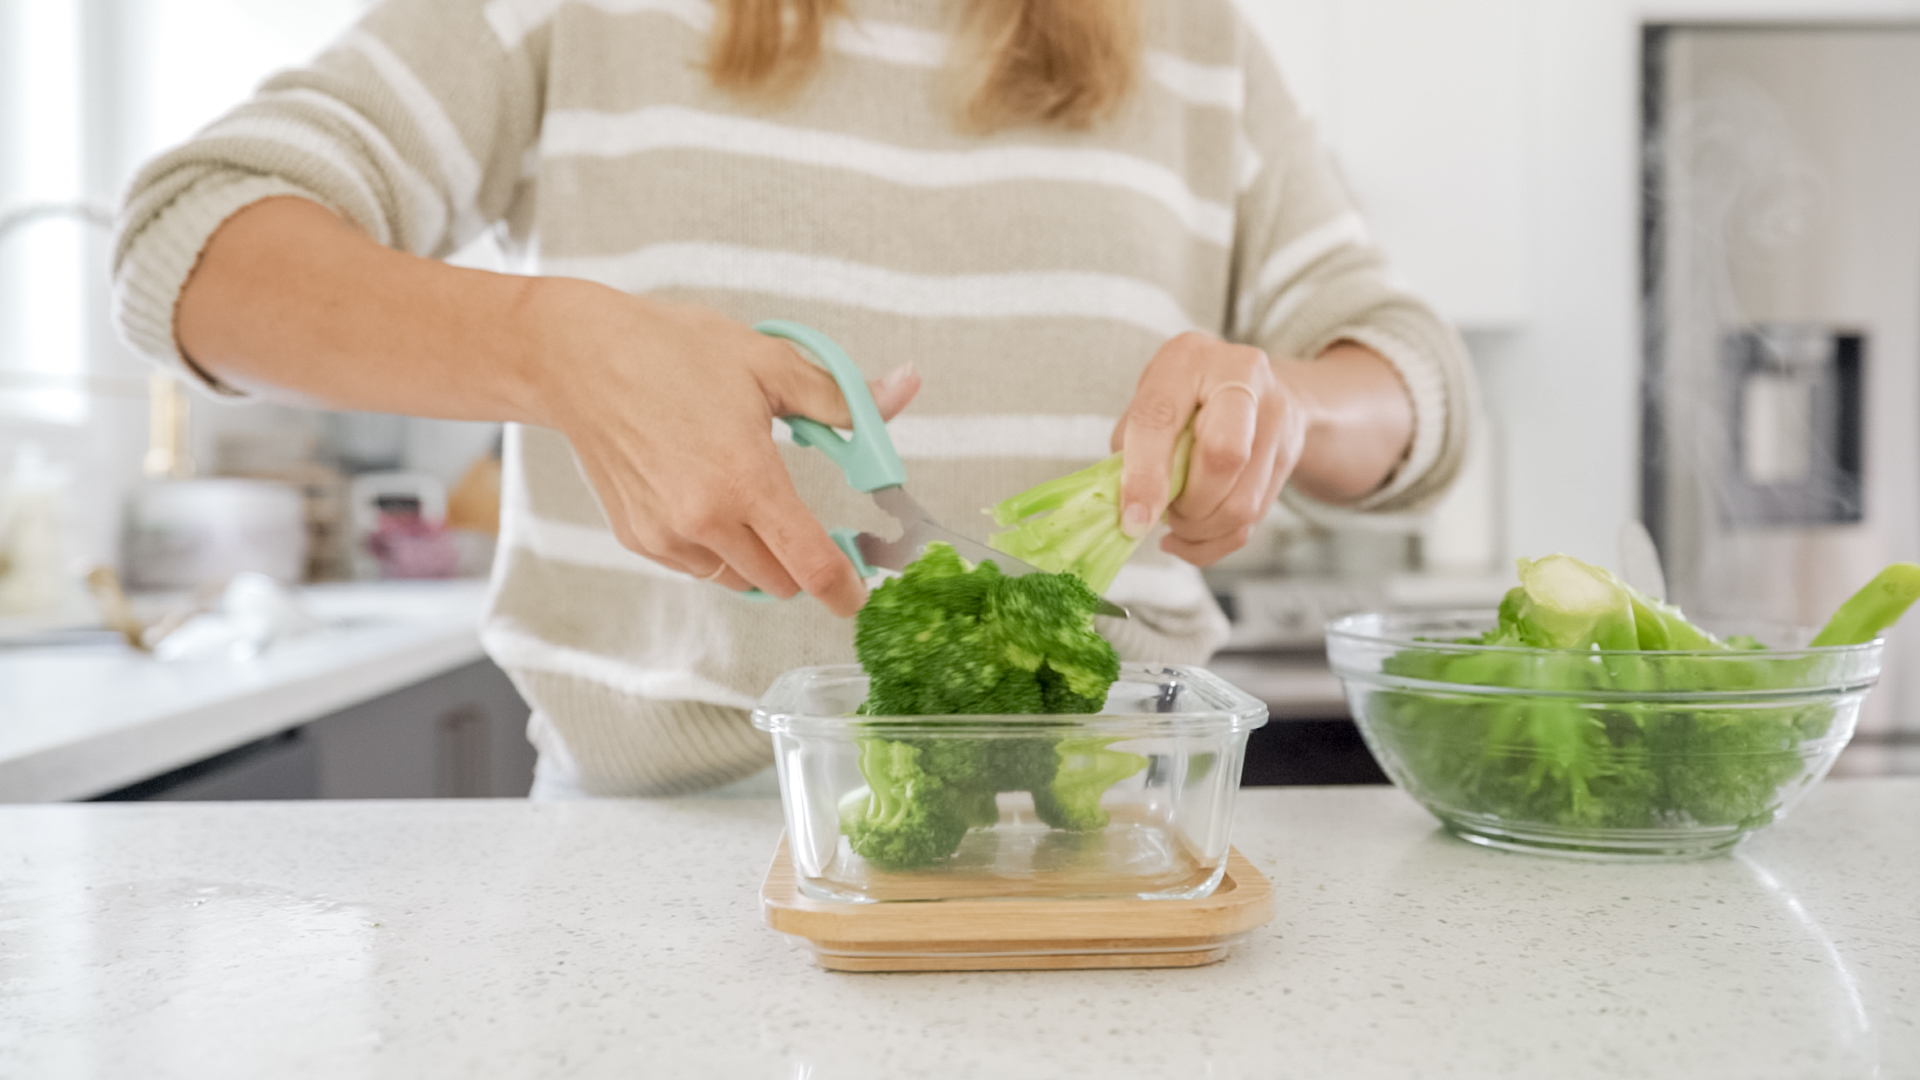 woman in kitchen cutting broccoli with scissors 